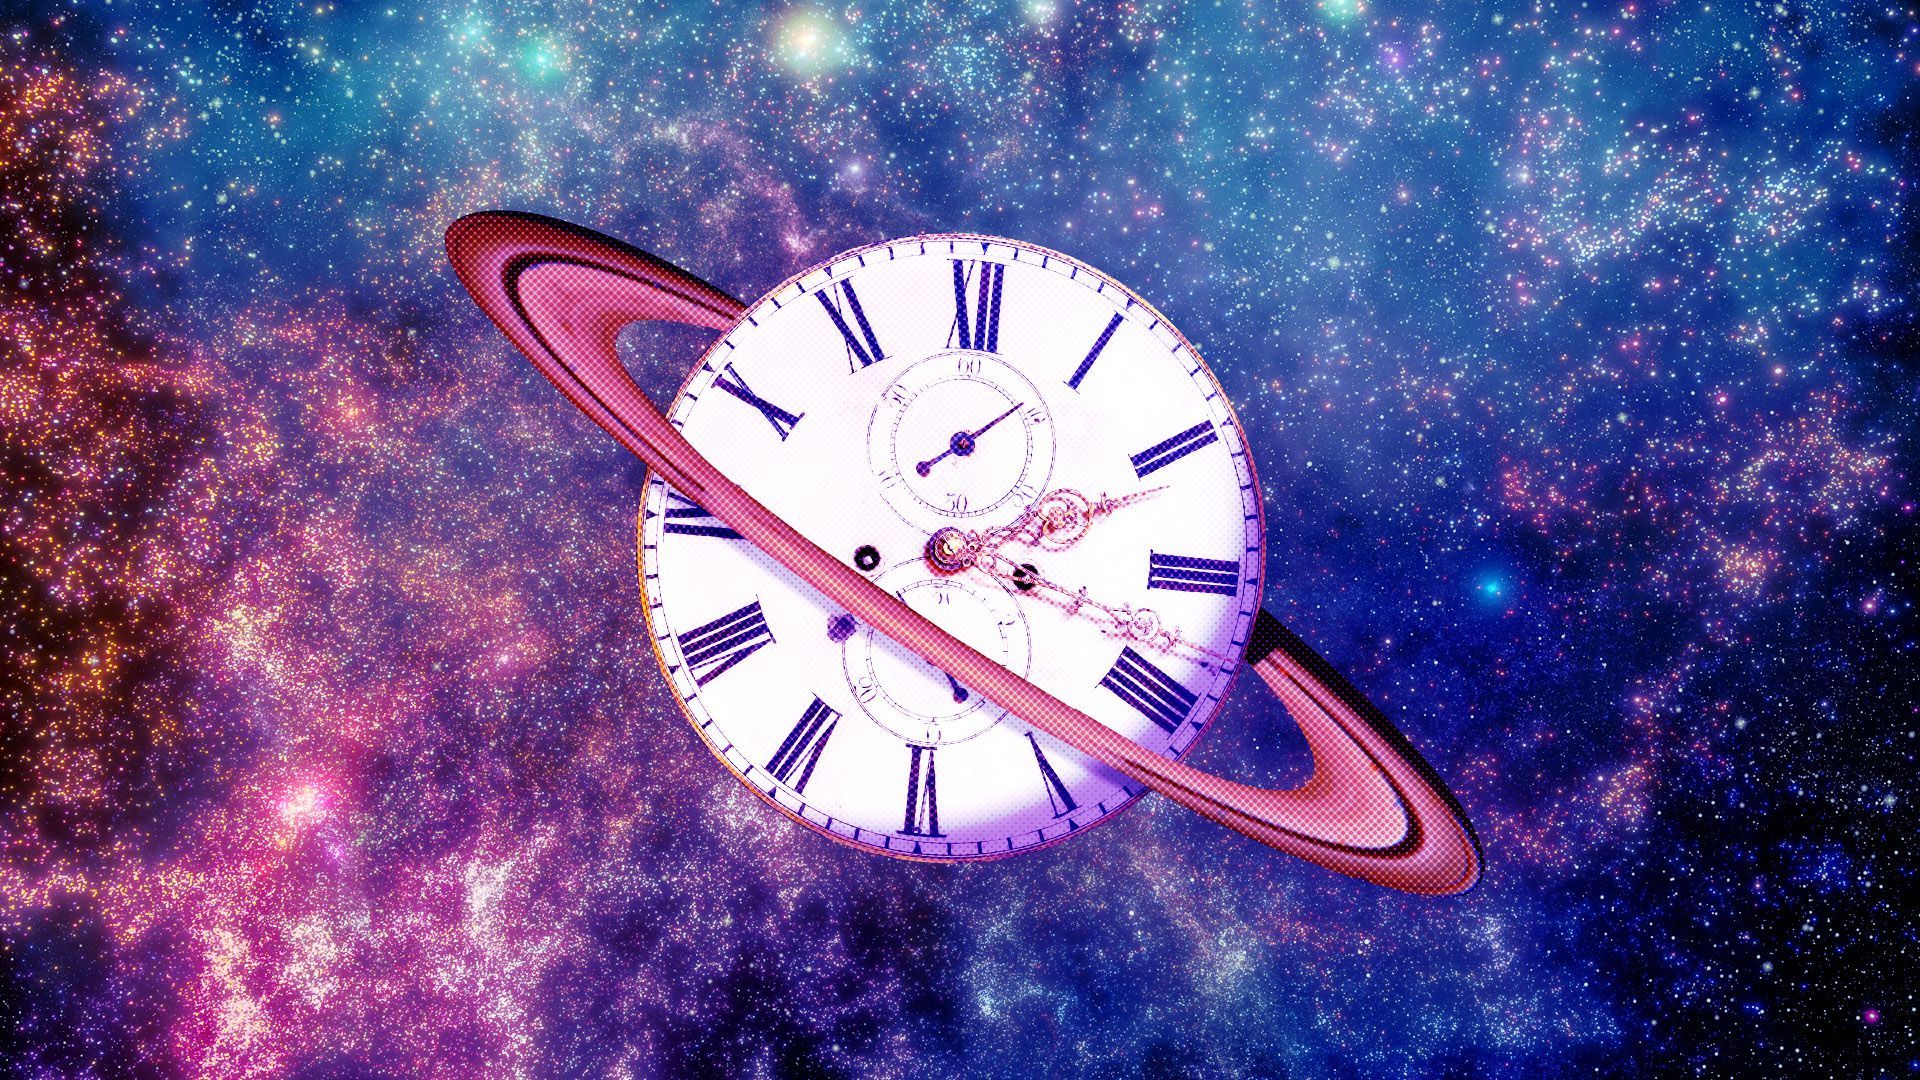 Illustration of an antique clock floating in space with the rings of Saturn around it